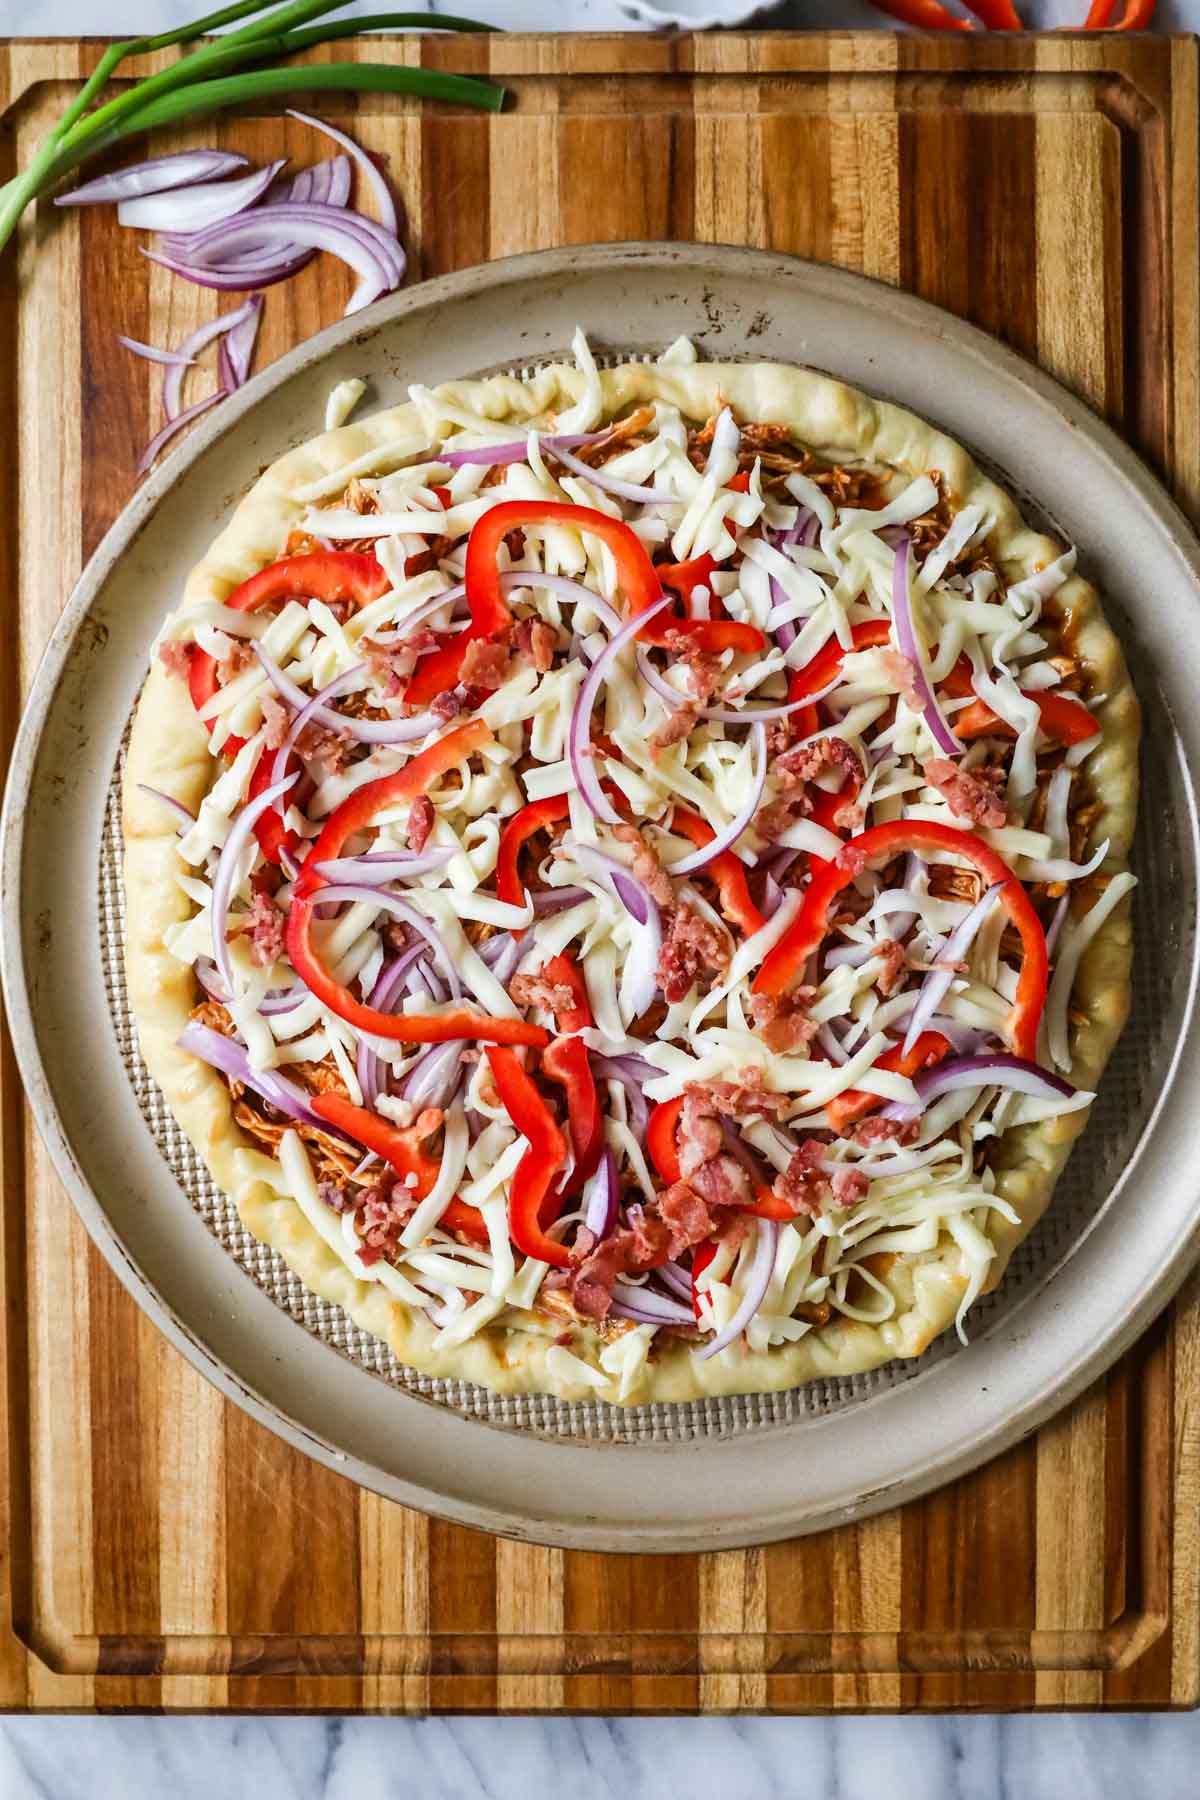 Overhead view of a pizza topped with BBQ chicken, cheese, peppers, and onions before baking.